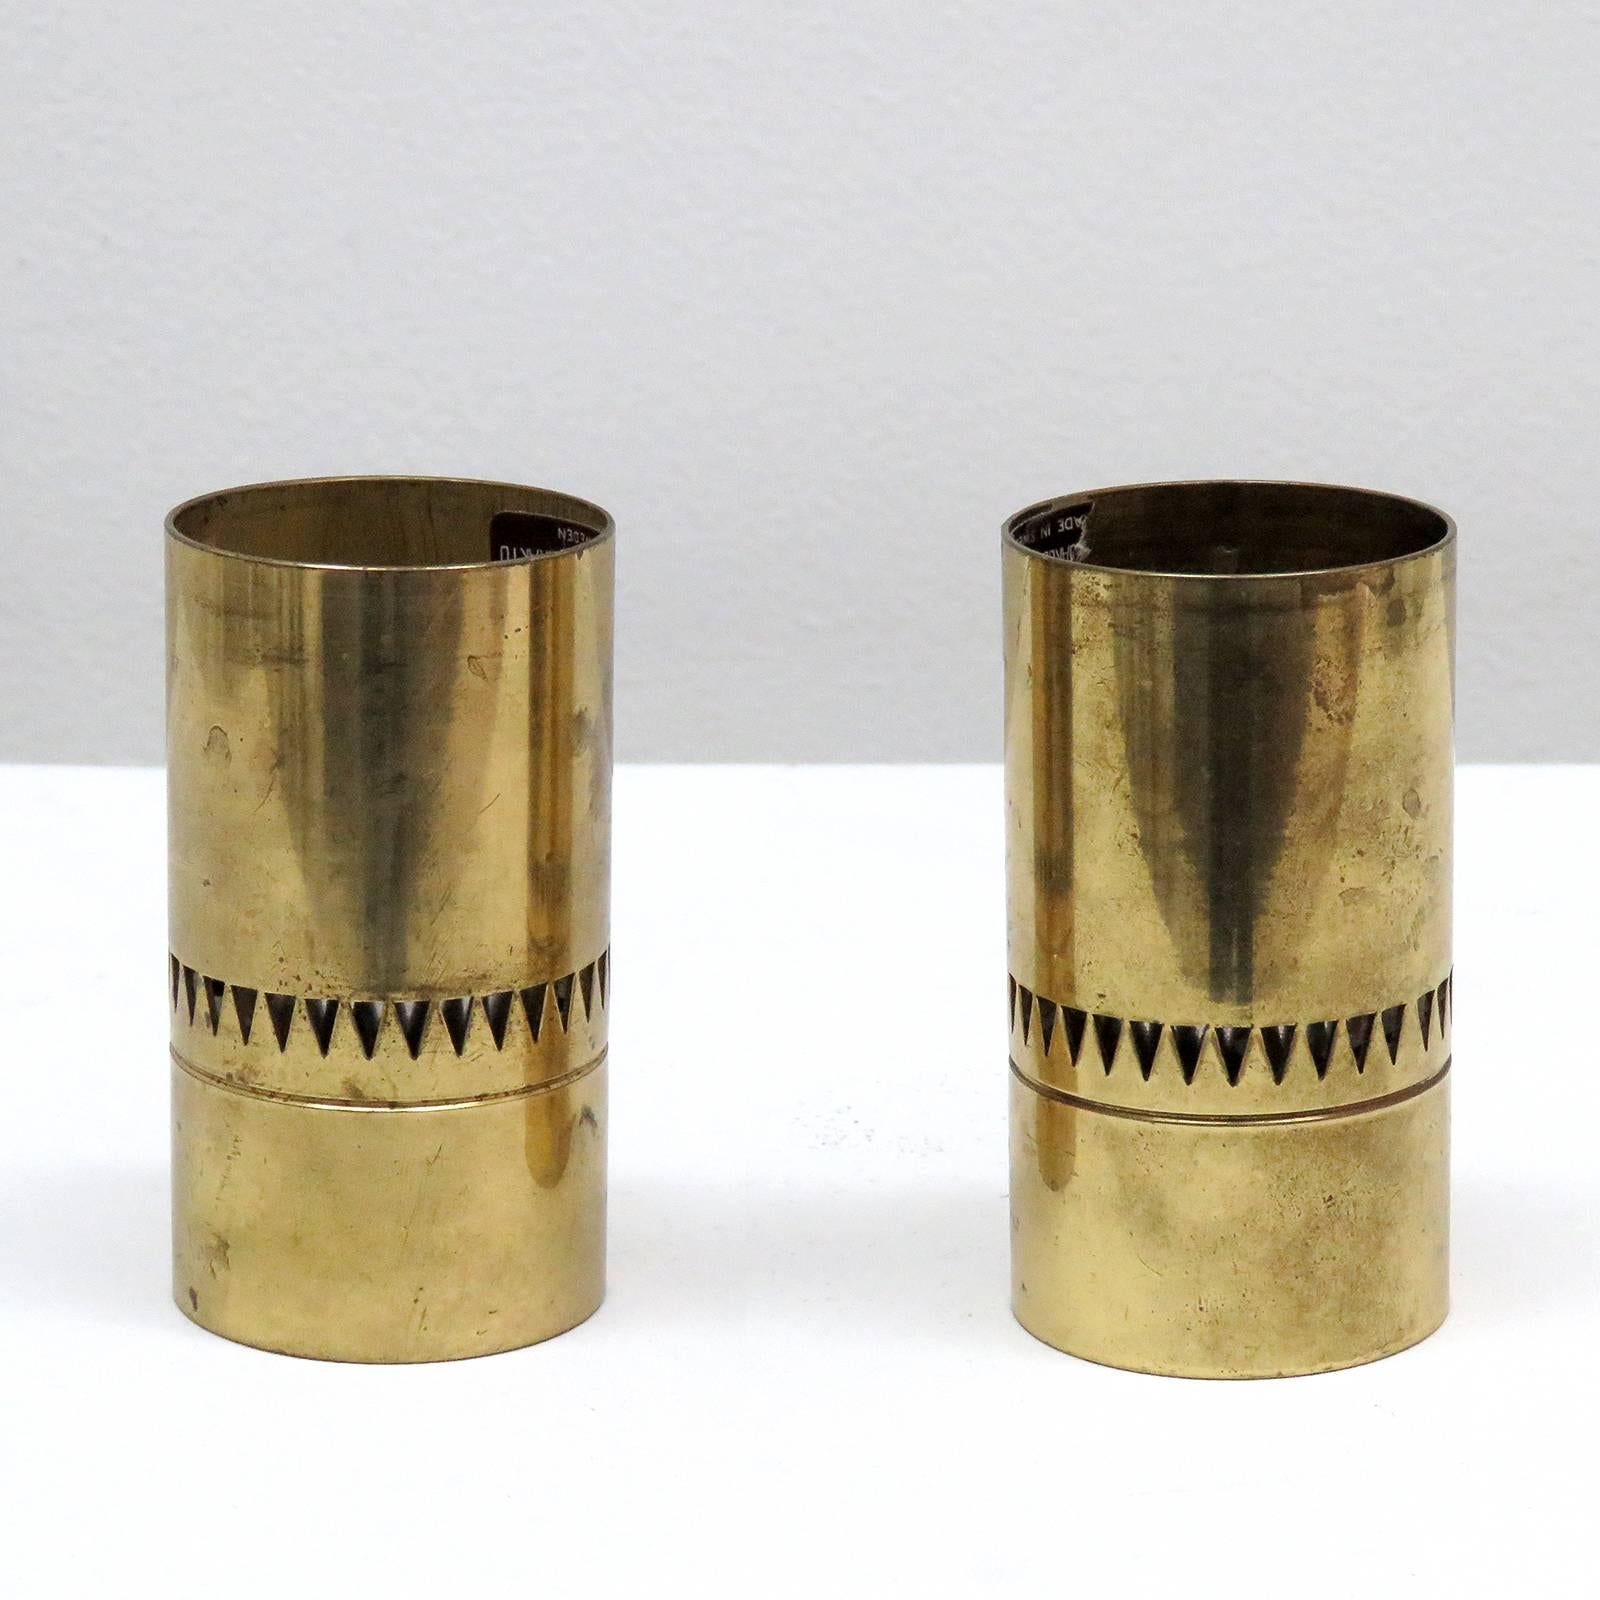 Rare Hans-Agne Jacobson candle shades for A/B Markaryd, with small triangular perforations, signed.